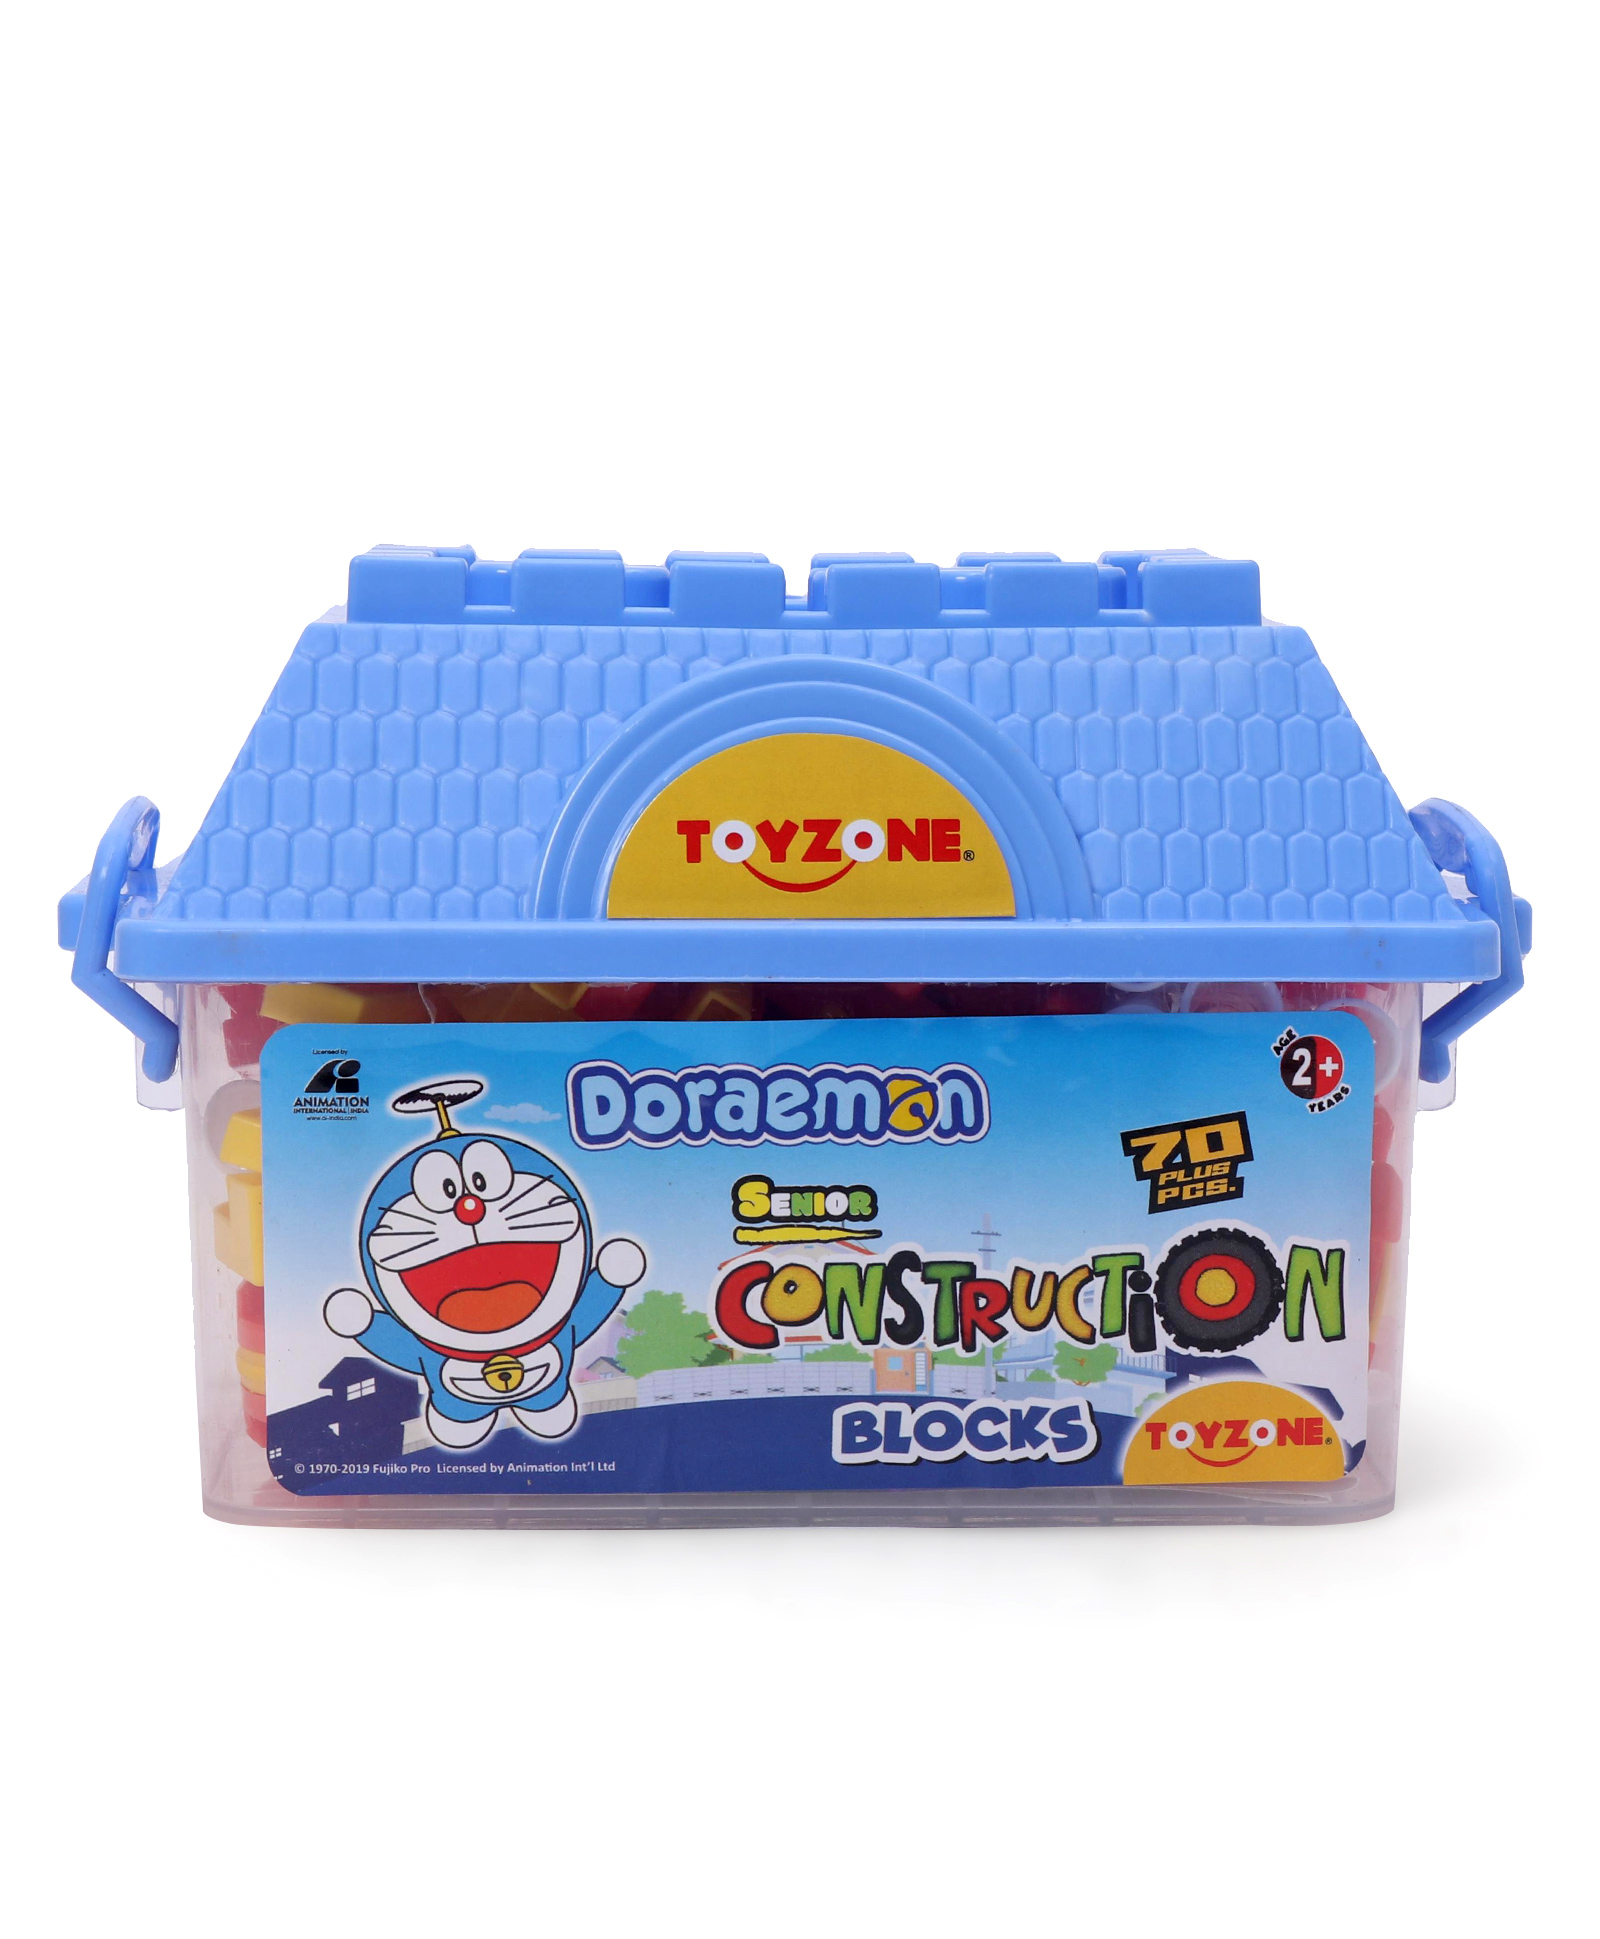 Toyzone Doraemon Multi Model Building Blocks with Box Blue - 70 Pieces  Online India, Buy Building & Construction Toys for (2-6 Years) at   - 11904221